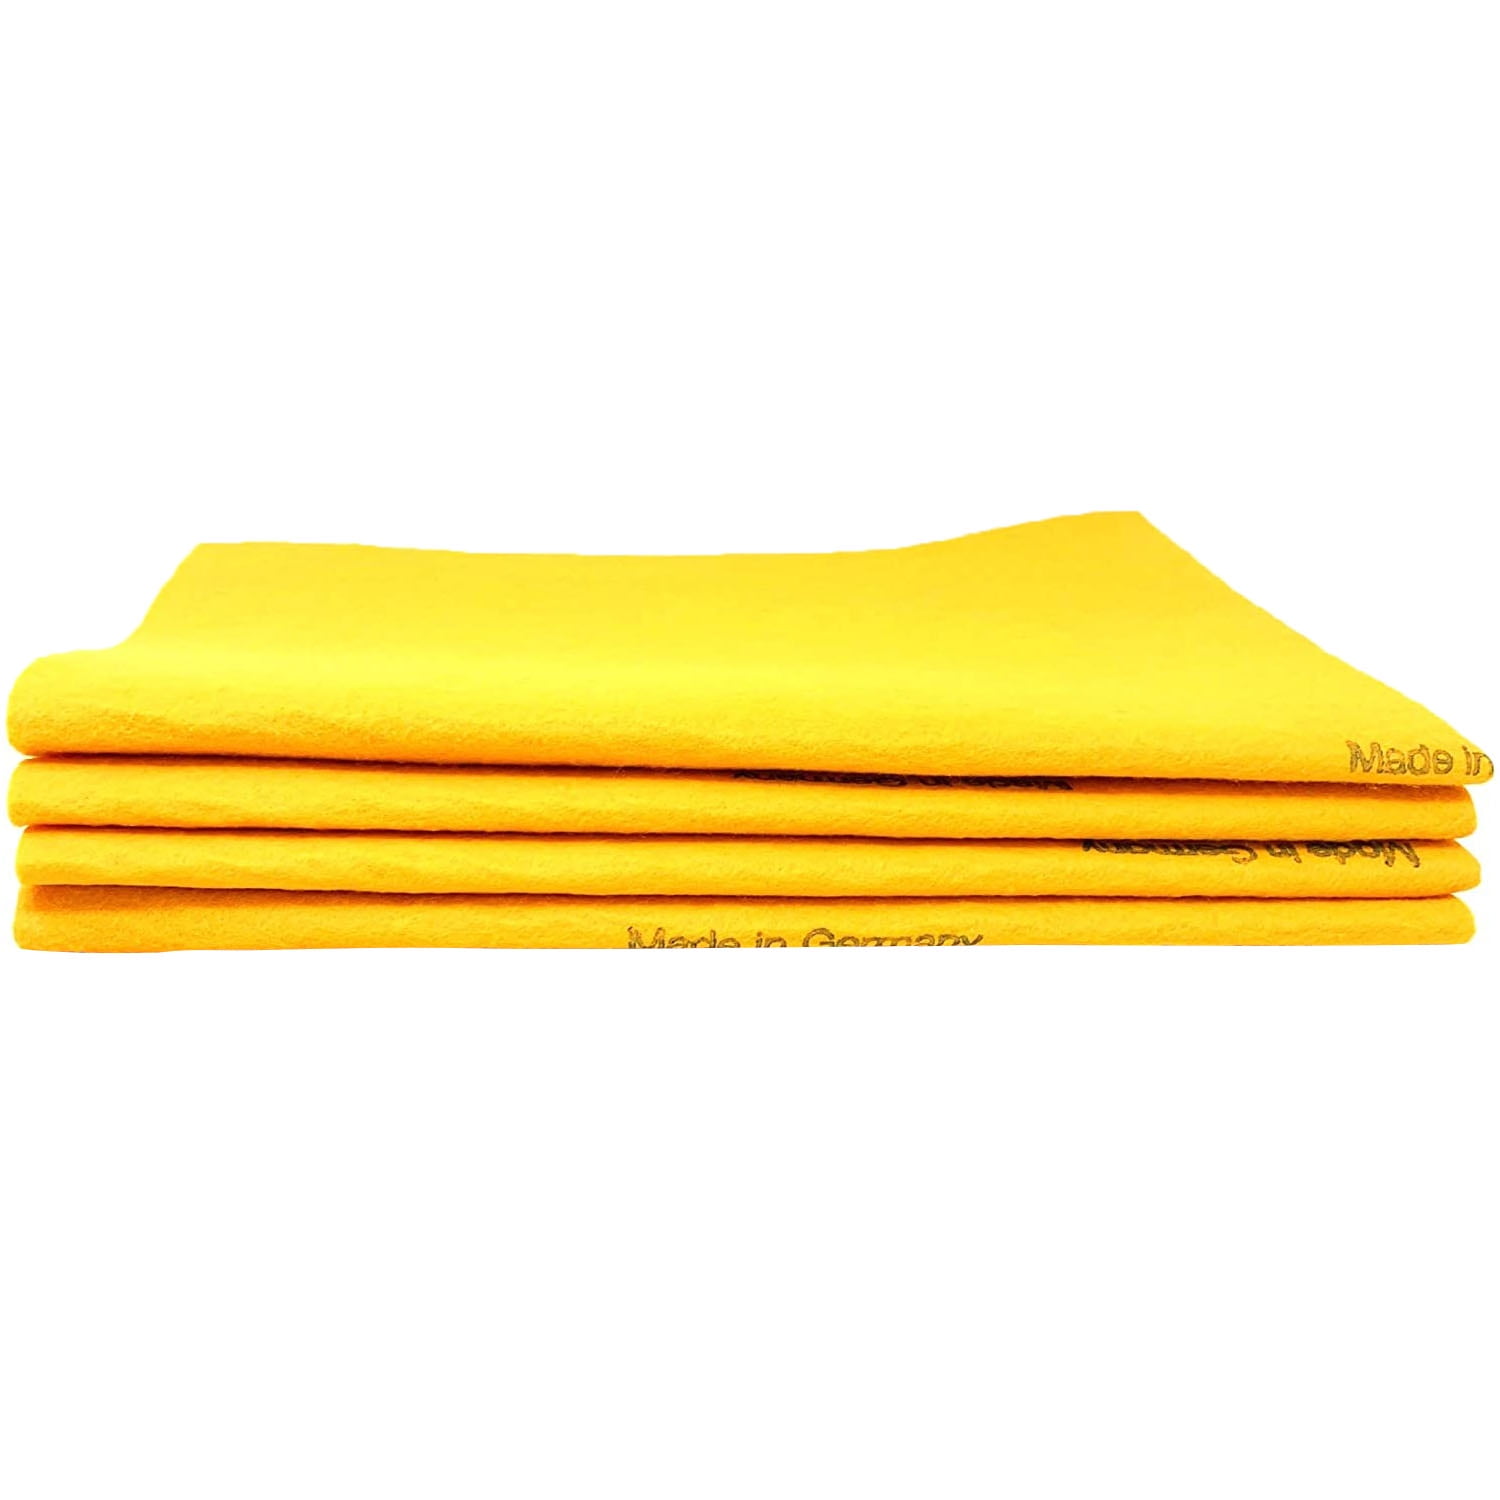 Shammy 4 PK Large Shammie SHAMWOW Towels 20 X 27.5 Each From Germany 785771001233 for sale online 